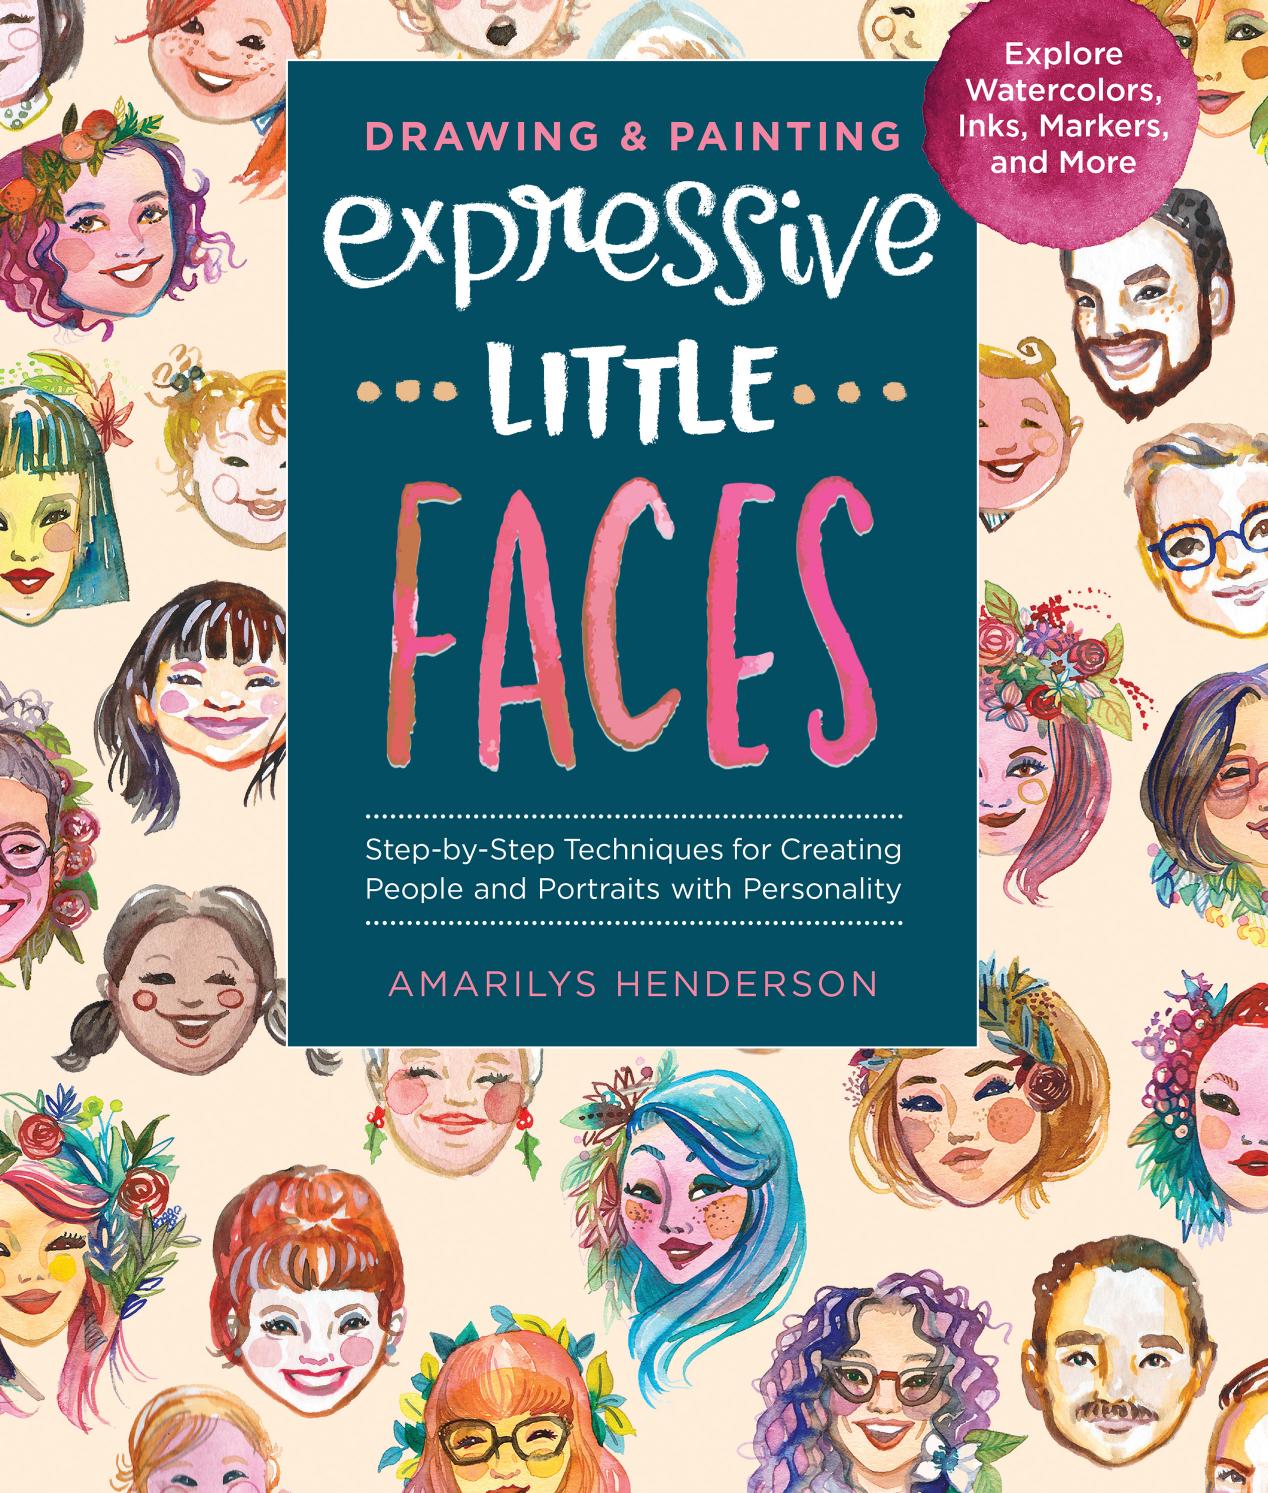 Drawing and Painting Expressive Little Faces by Amarilys Henderson